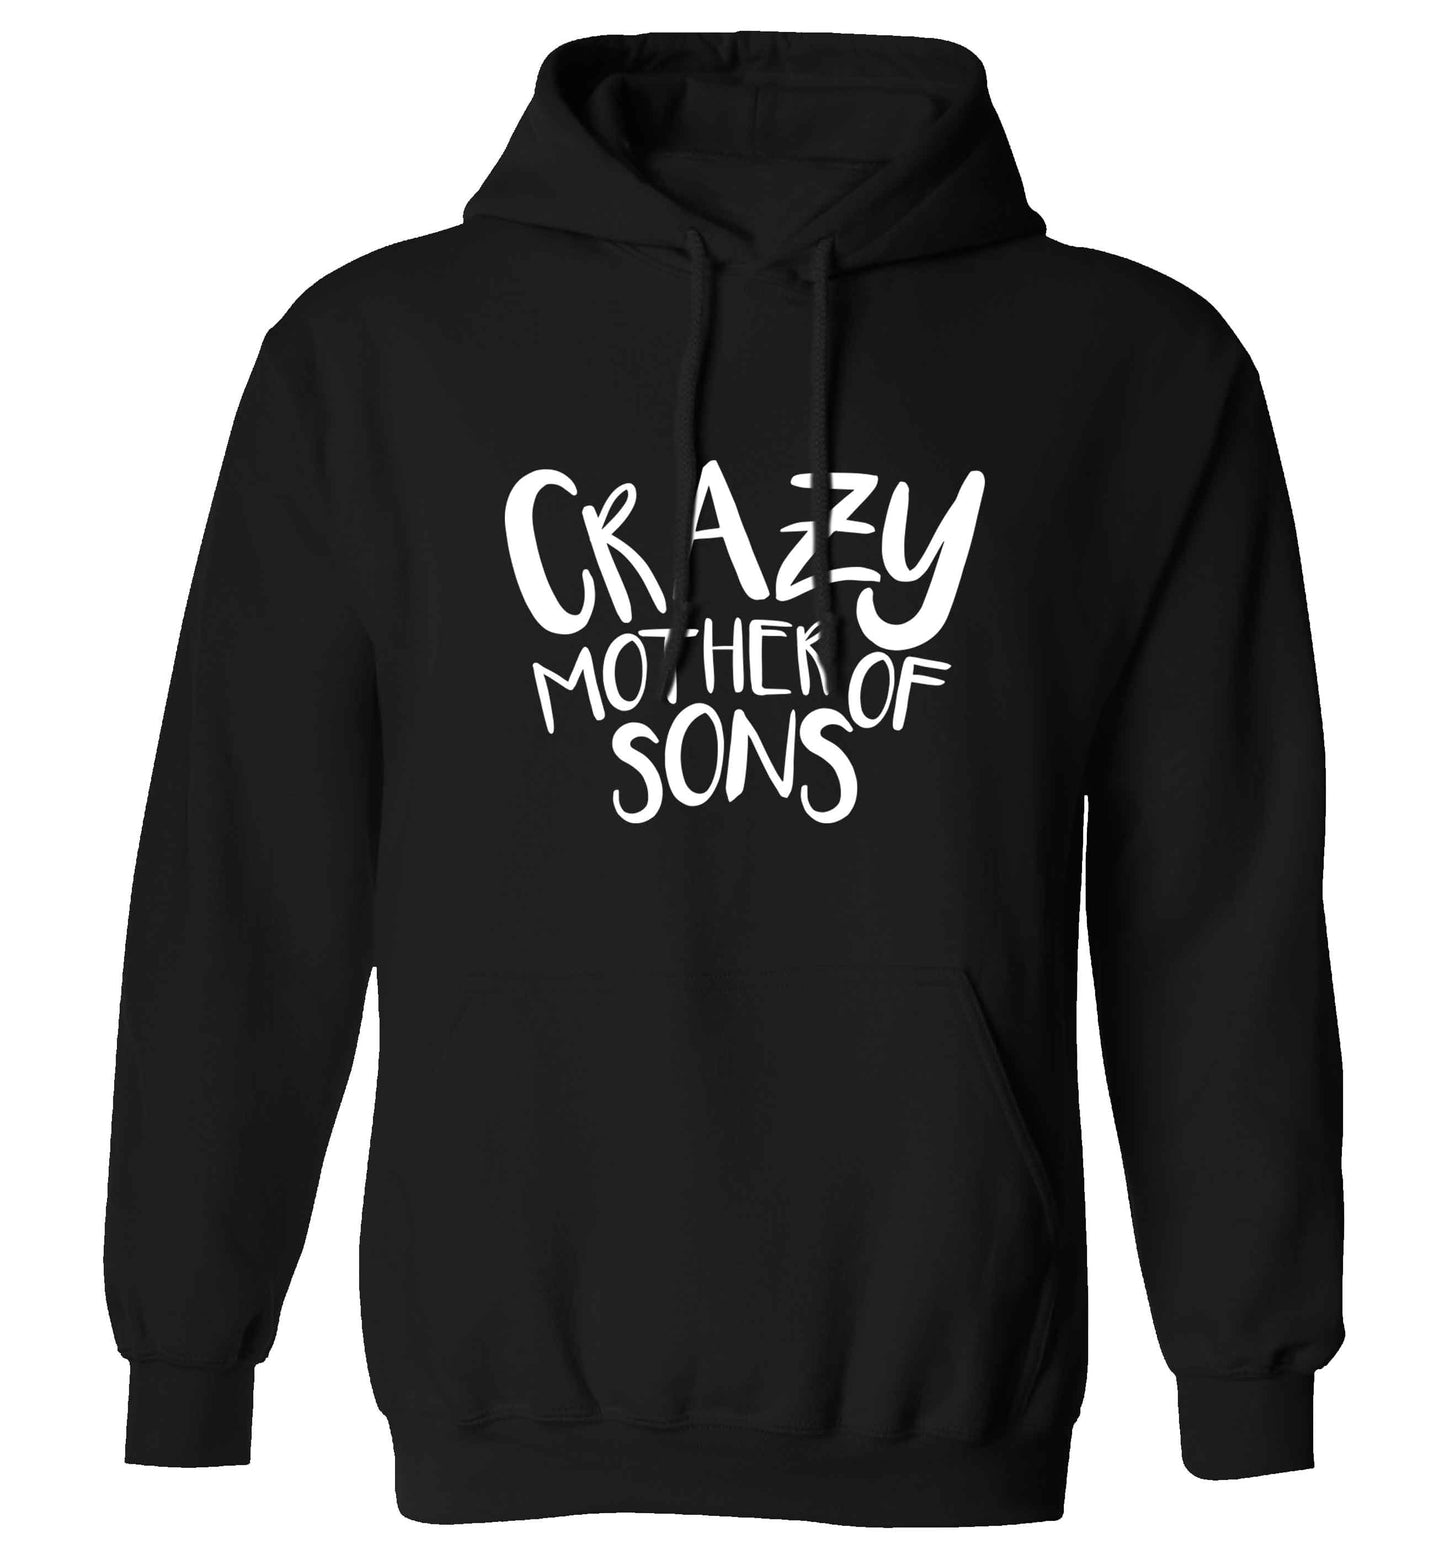 Crazy mother of sons adults unisex black hoodie 2XL